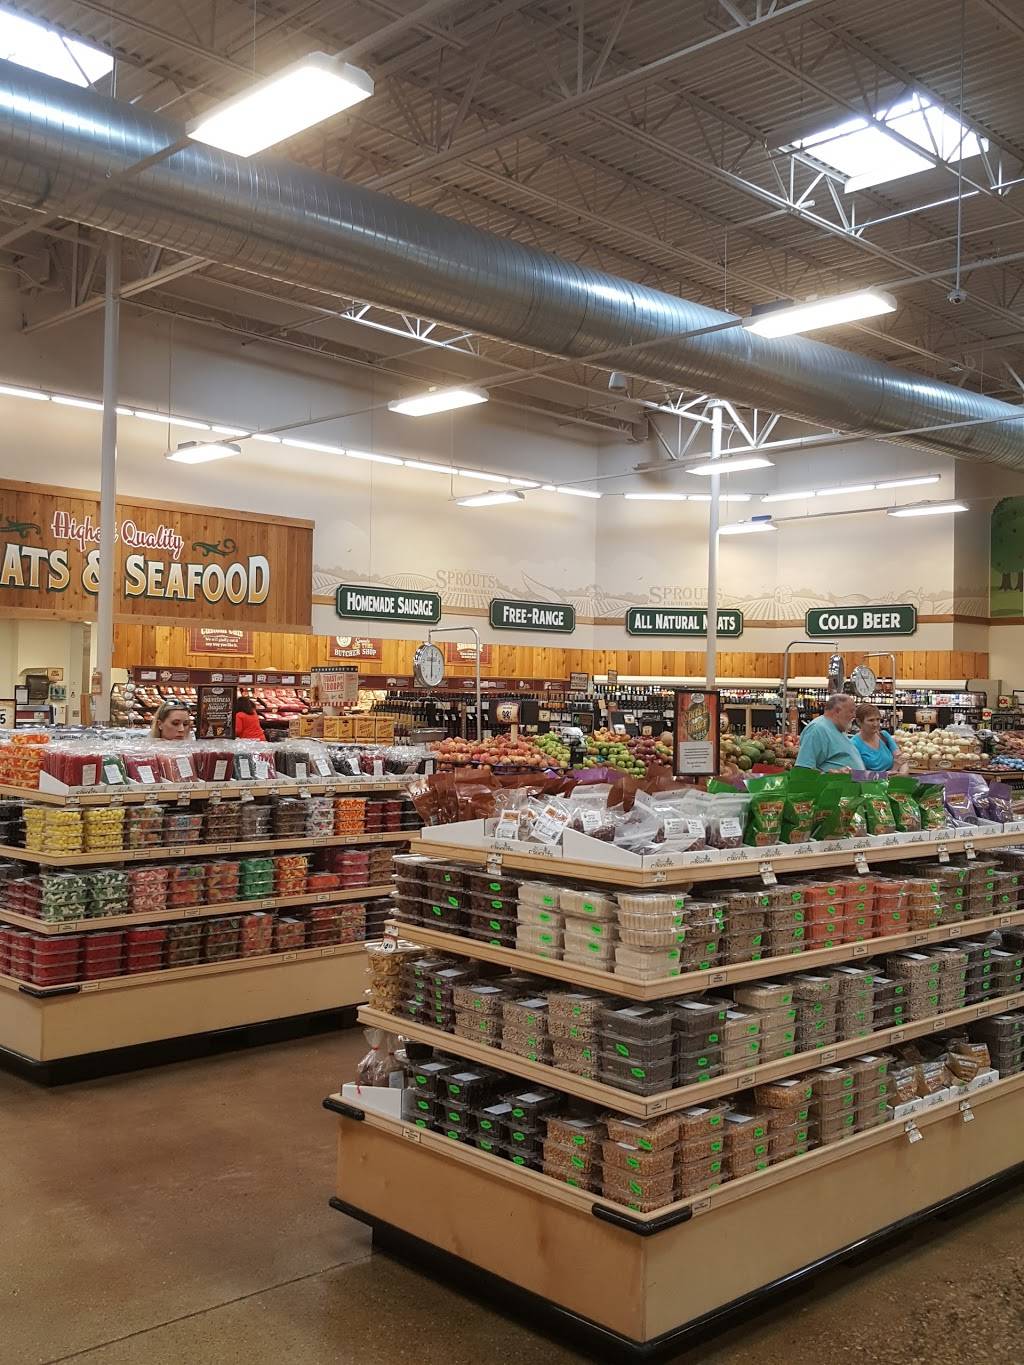 Sprouts Farmers Market | 2003 S Main St, Keller, TX 76248, USA | Phone: (817) 380-7024